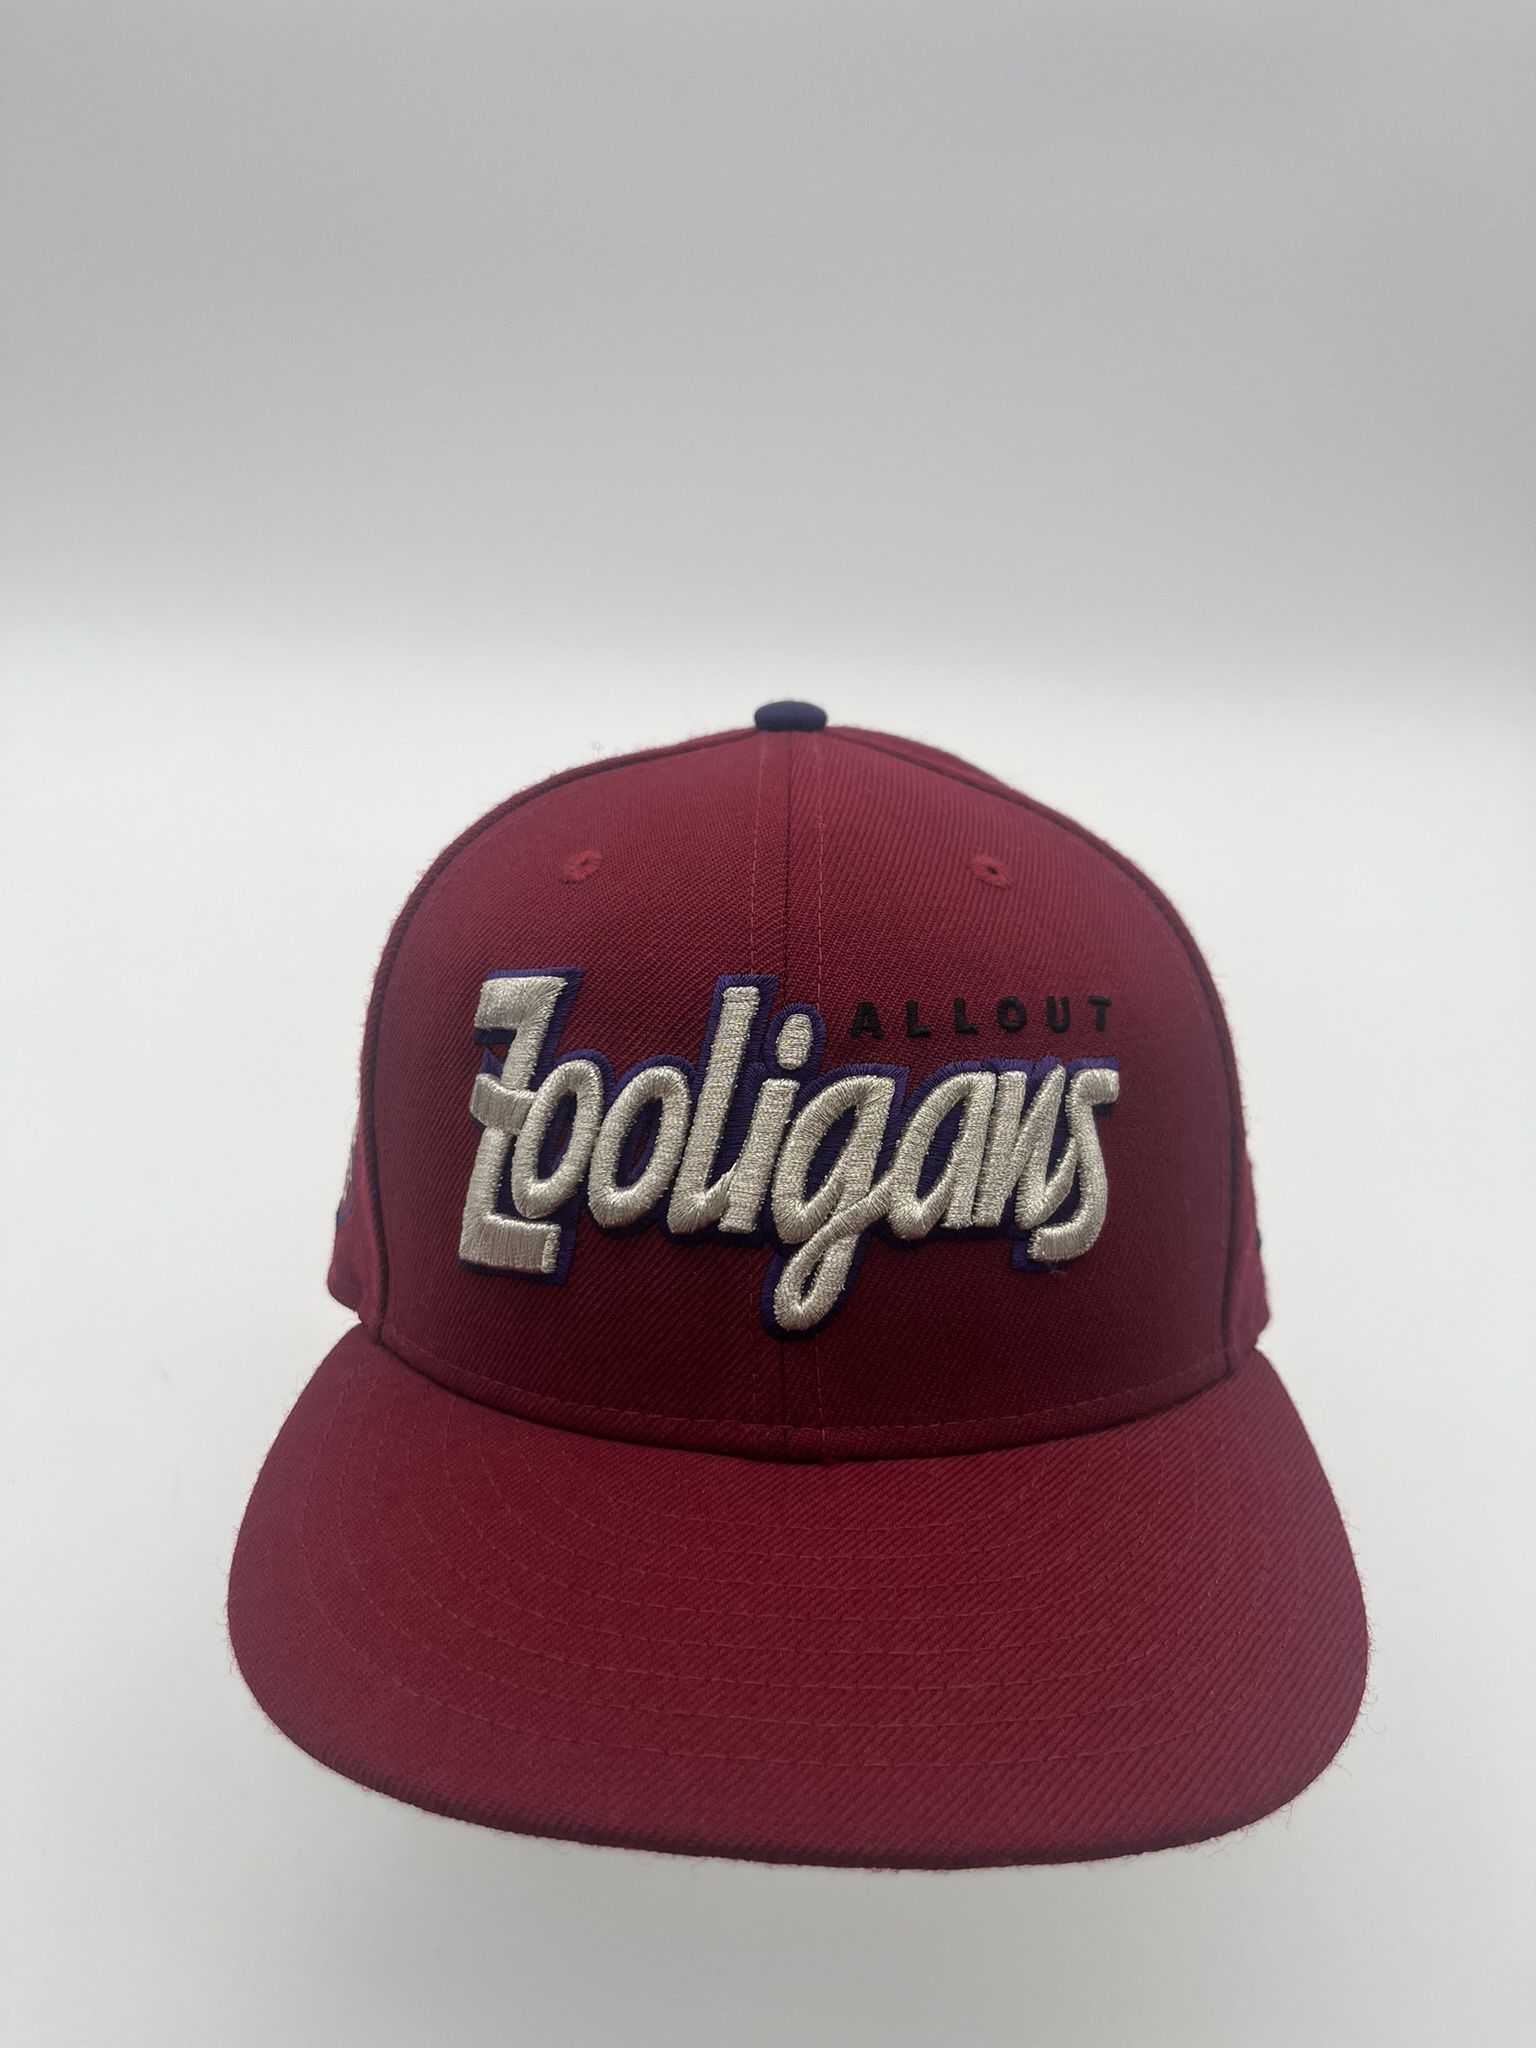 (44) Zooligans Allout Dark Red Hat Size One Size Fits All 